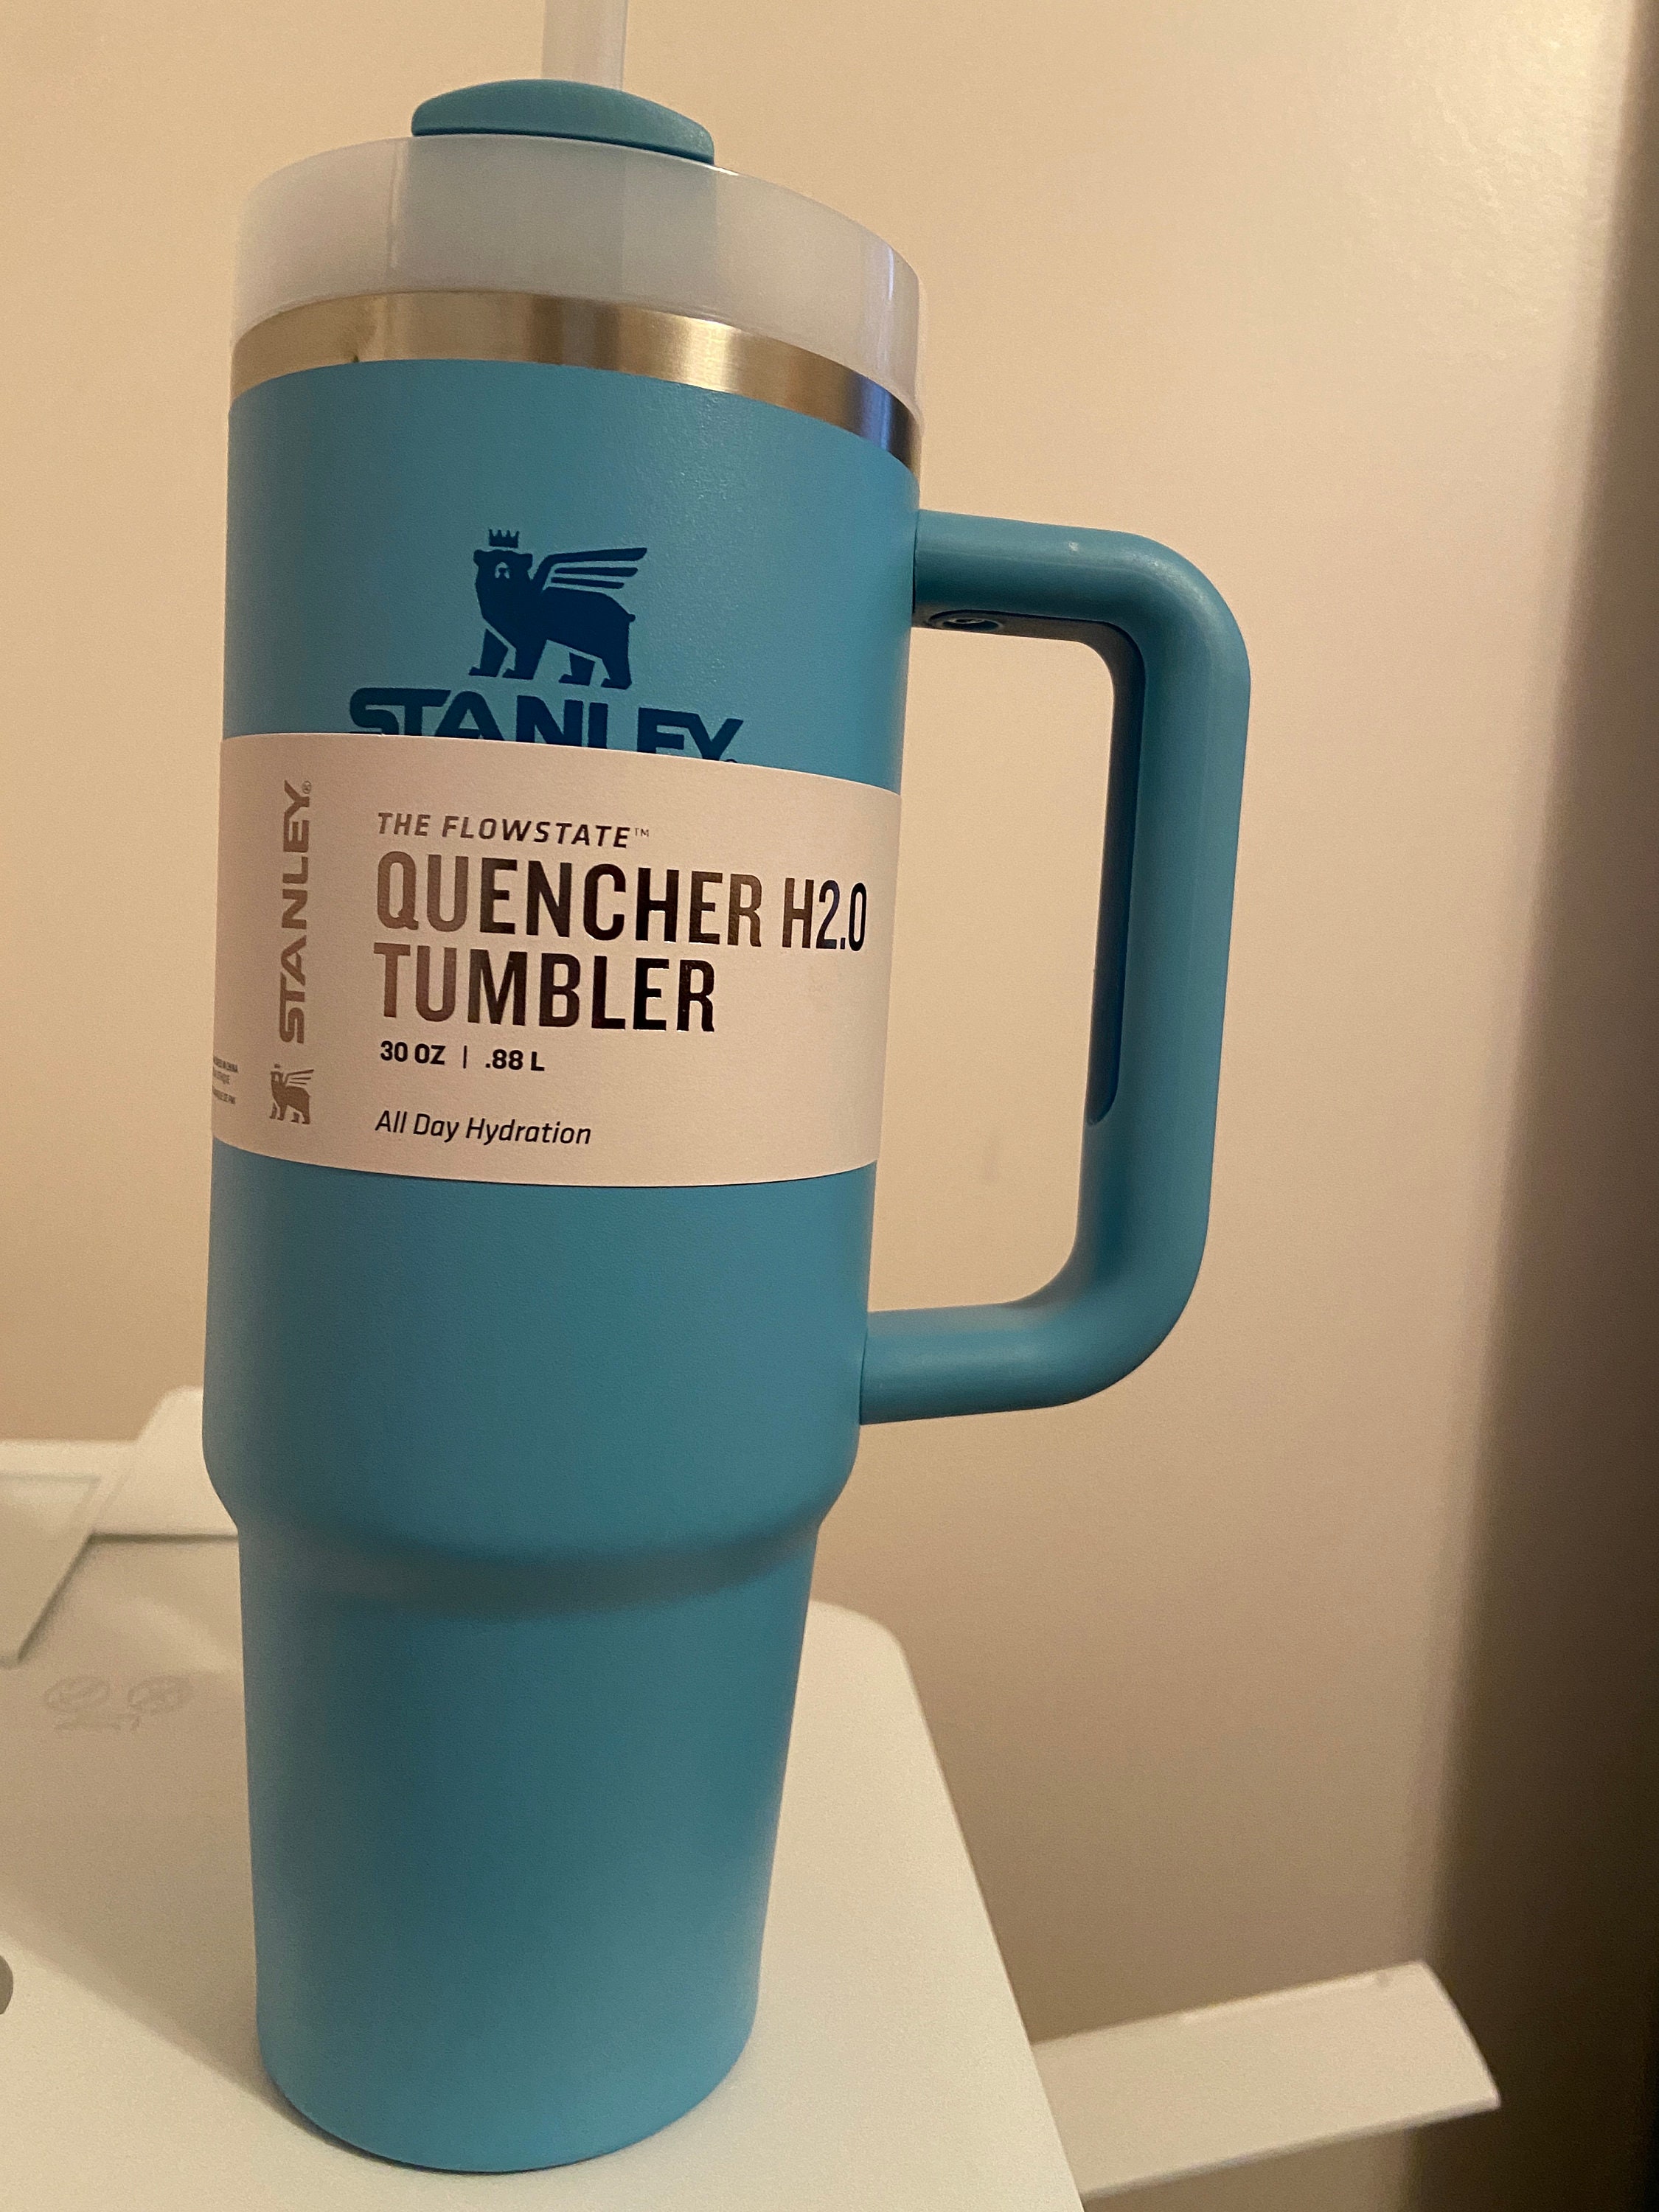 STANLEY Quencher H2.0 Tumbler - Pool, 30: Tumblers & Water  Glasses